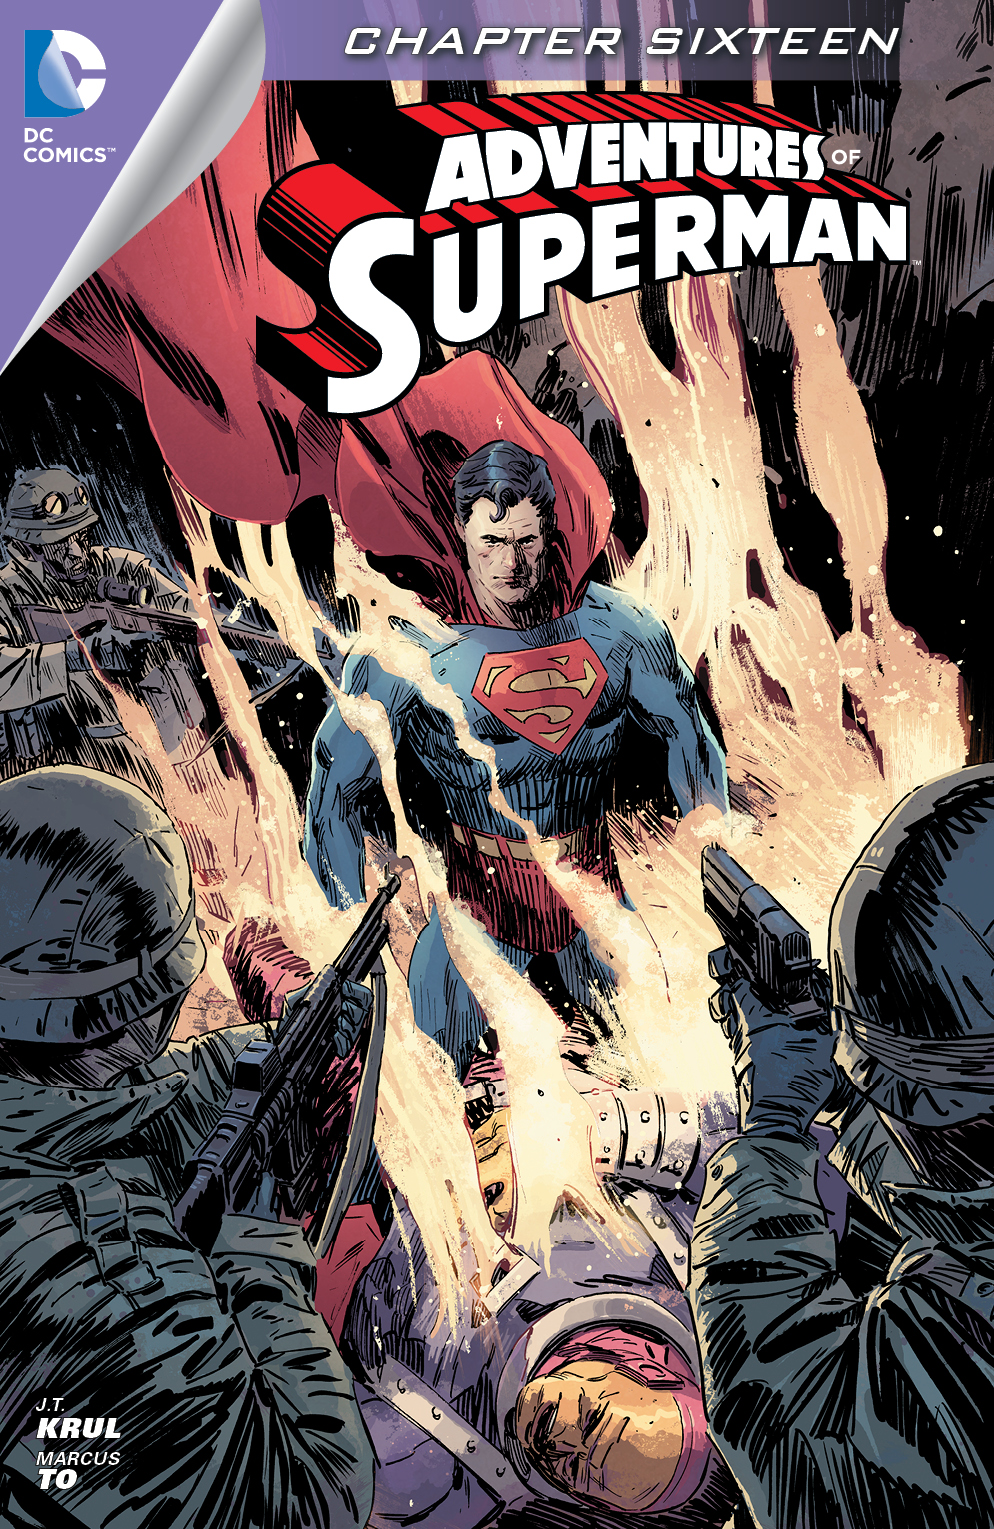 Adventures of Superman (2013-) #16 preview images